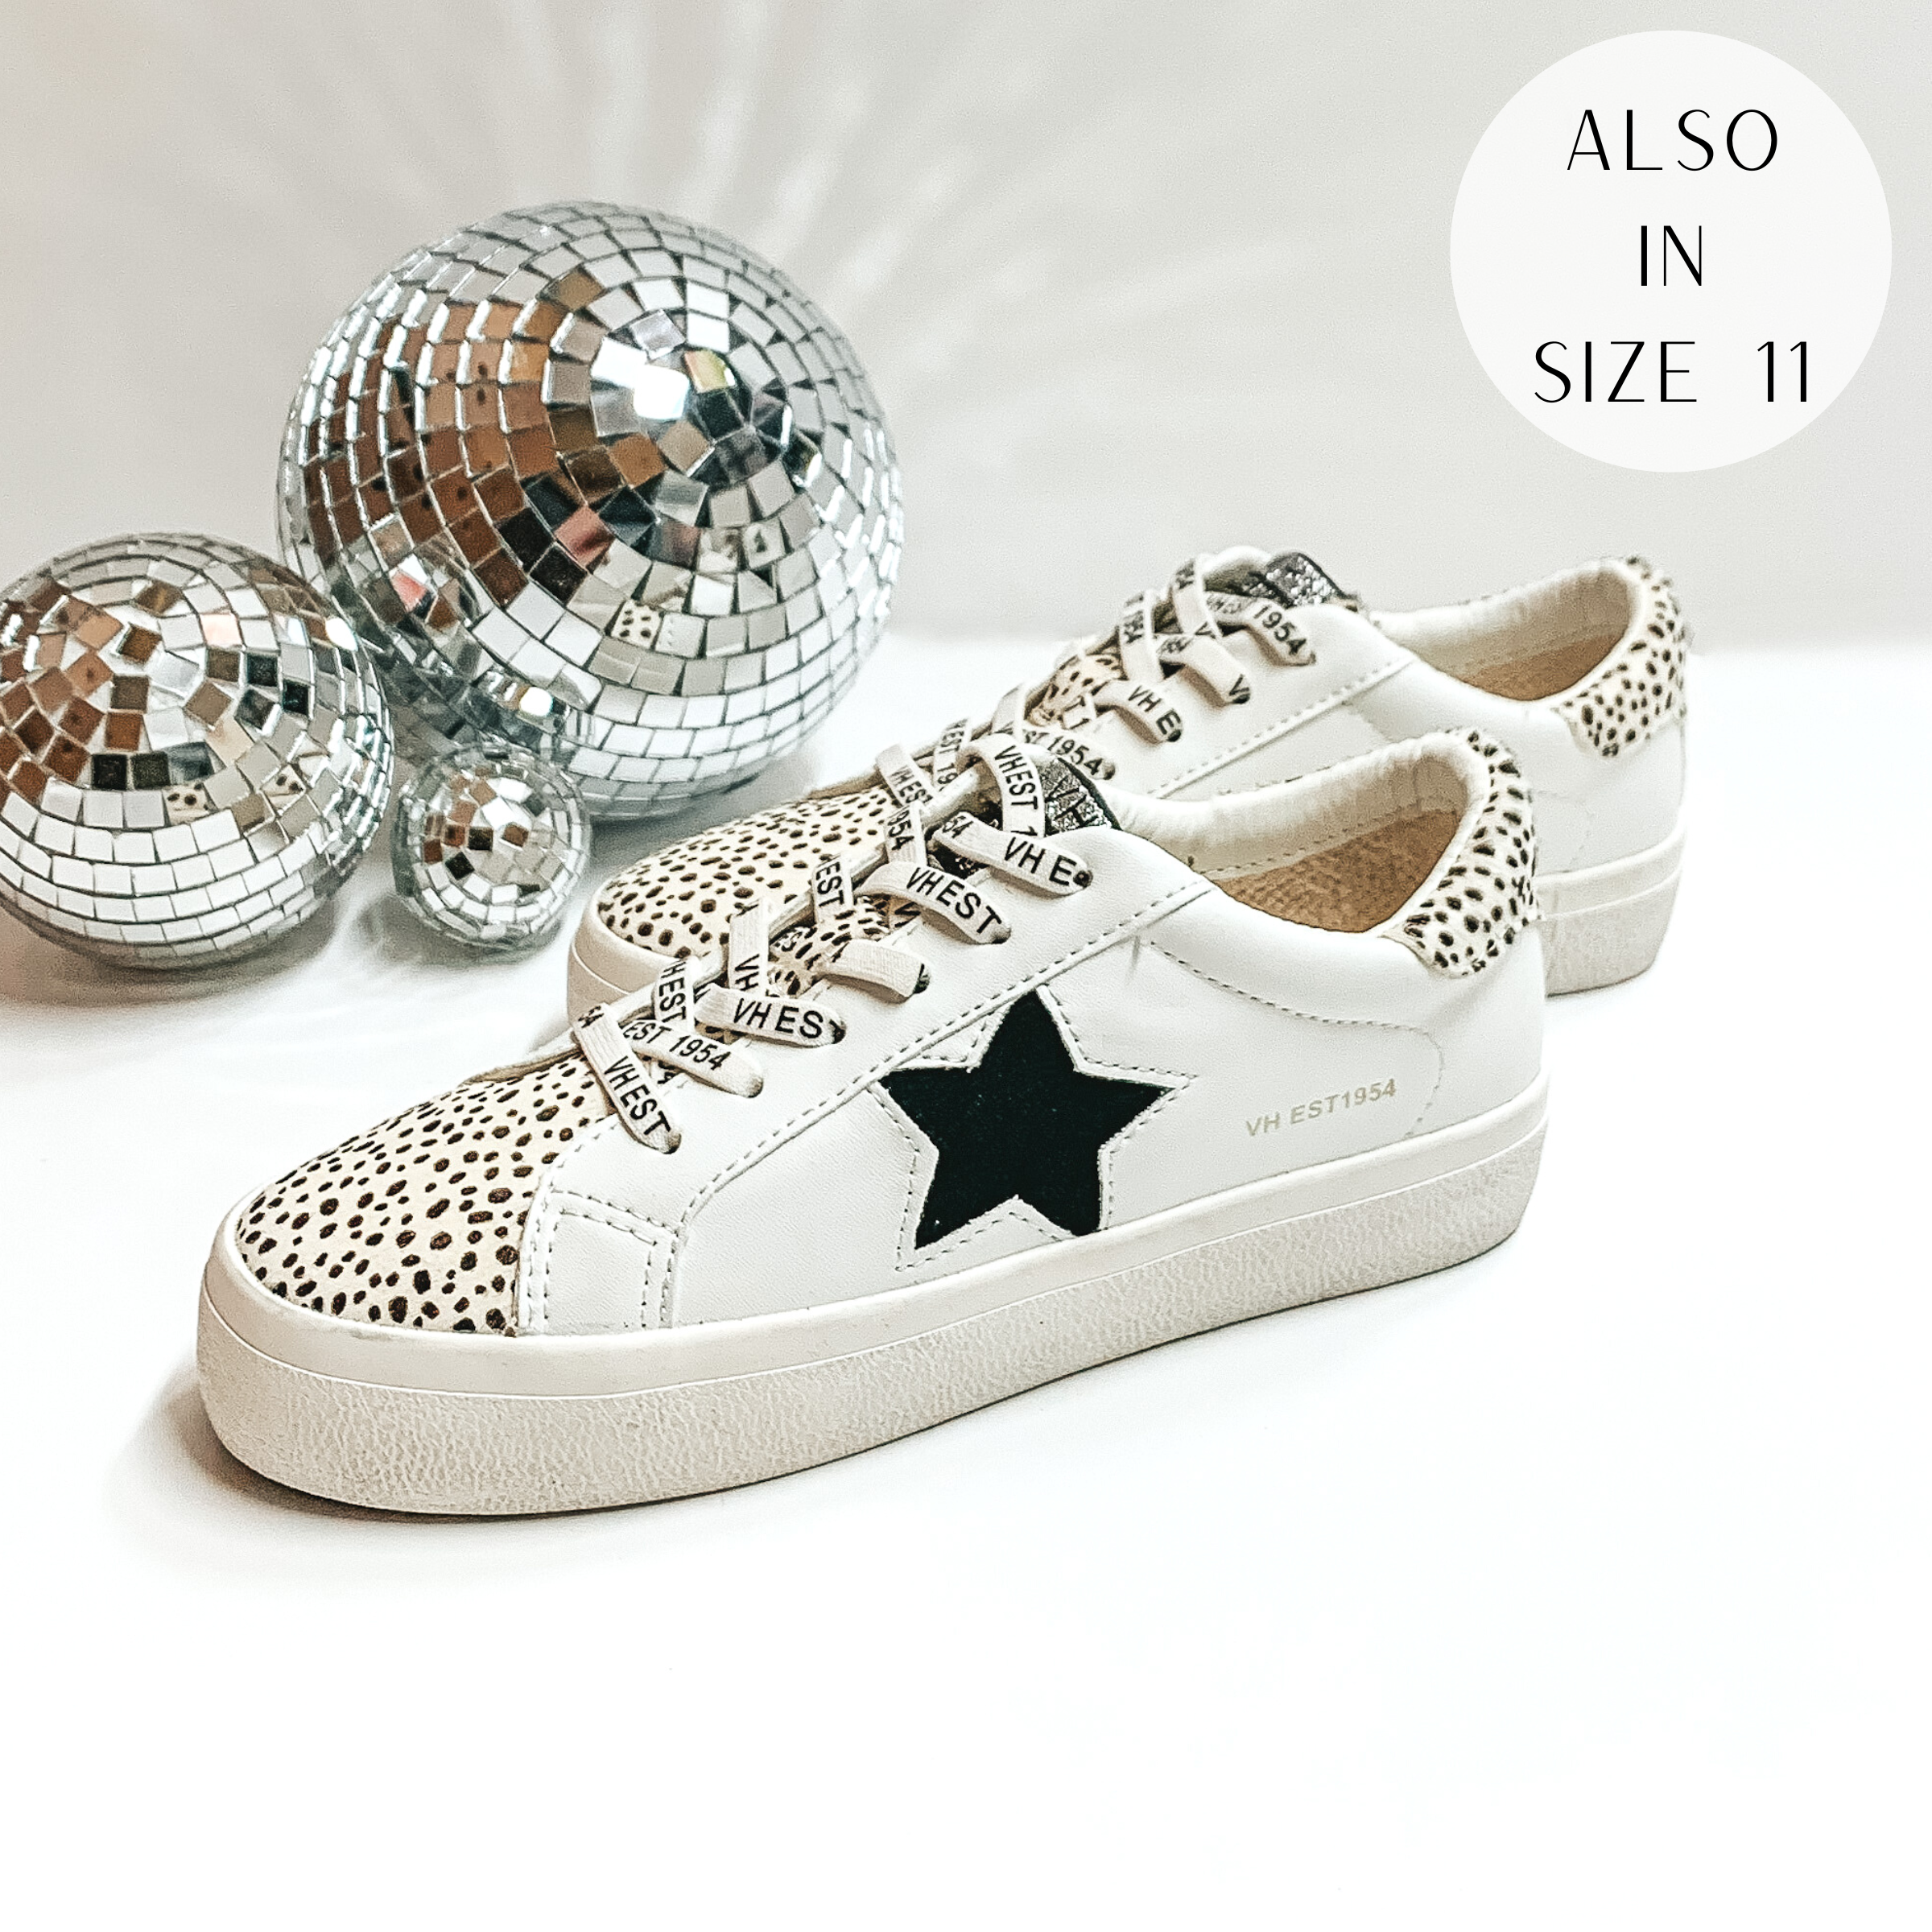 White tennis shoes with the tongue down to the toe part with a white and black cheetah print design. These shoes also have a black star emblem on the side of the shoe and a patch of white and black cheetah print on the heel. These shoes are pictured on a white background with disco balls on the left hand side.